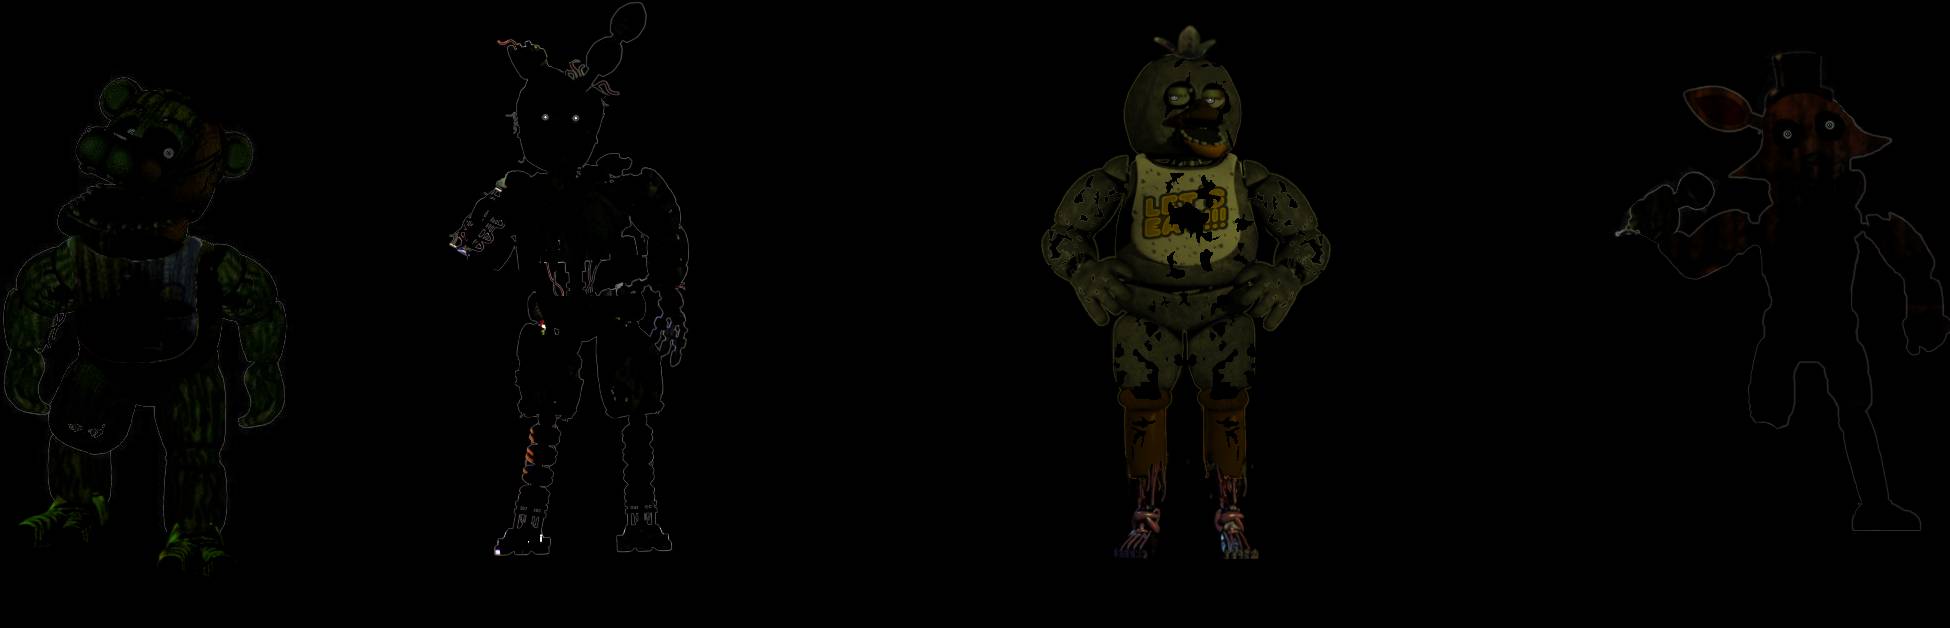 FNaF 3 Accurate Characters v3 by Educraft on DeviantArt